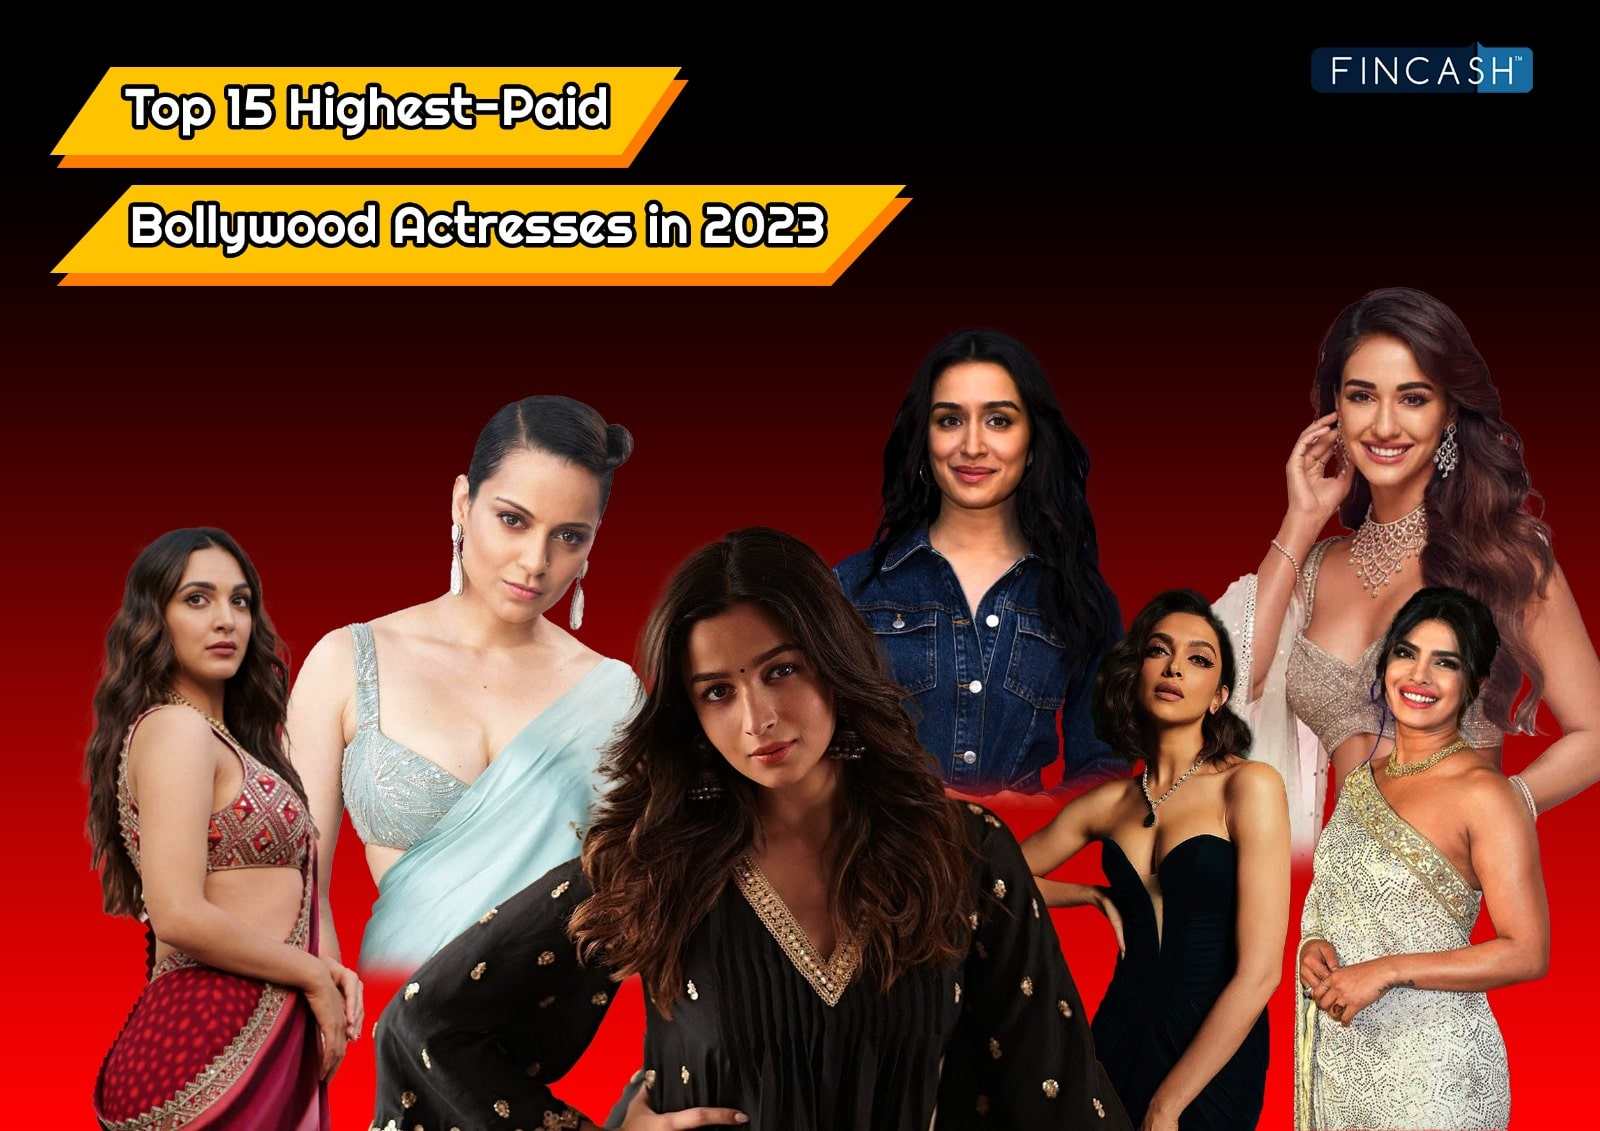 Top 15 Highest-Paid Bollywood Actresses in 2023